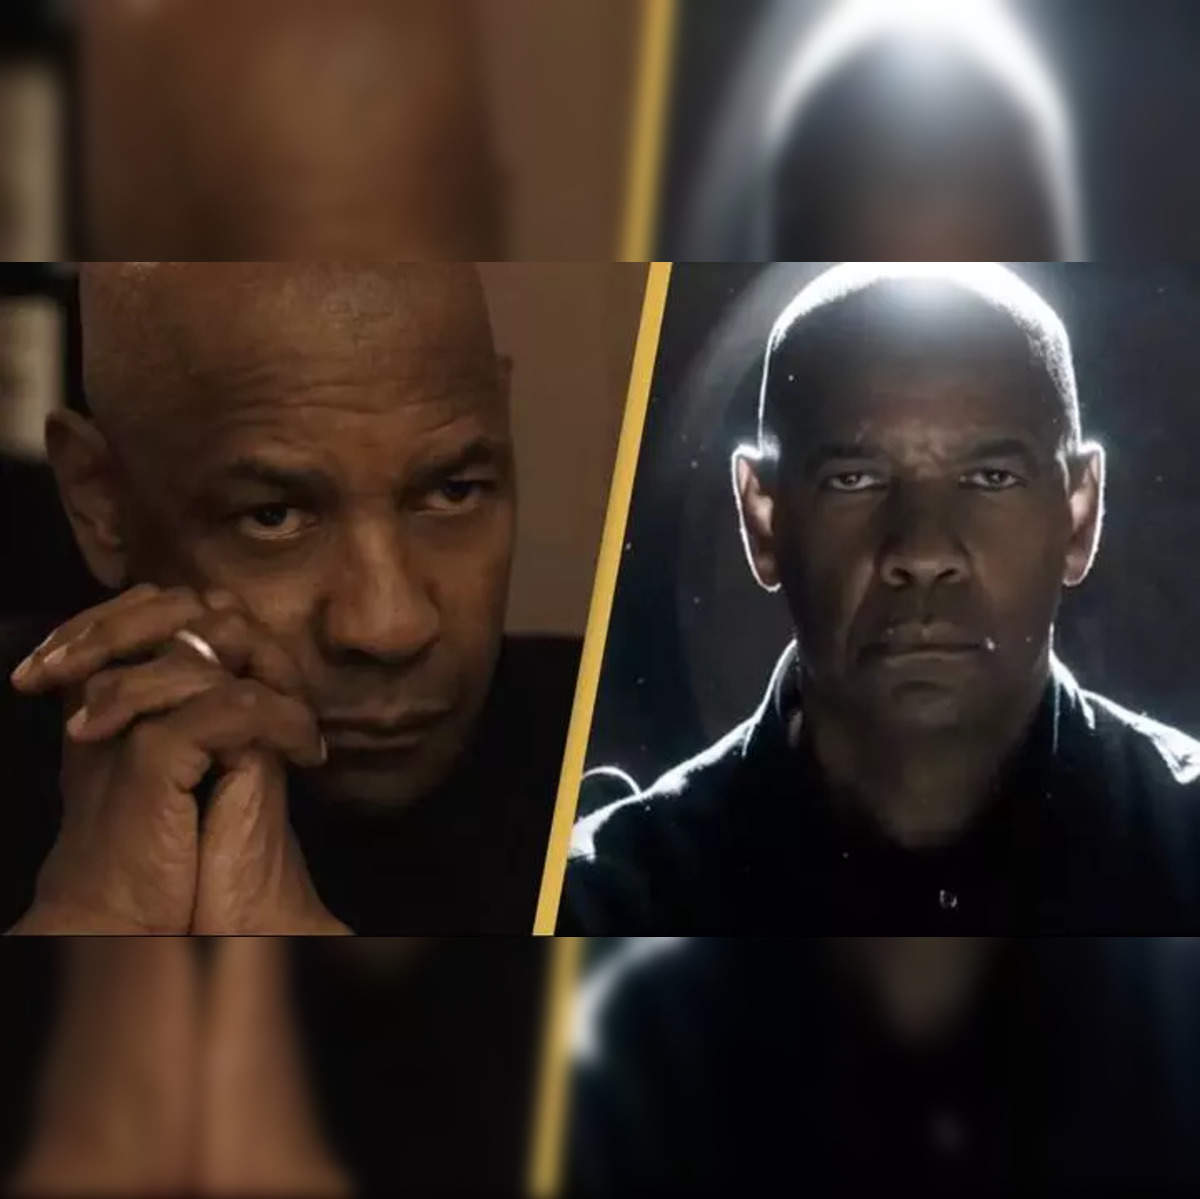 EQUALIZER 3: THE FINAL CHAPTER, EQUALIZER 3: THE FINAL CHAPTER